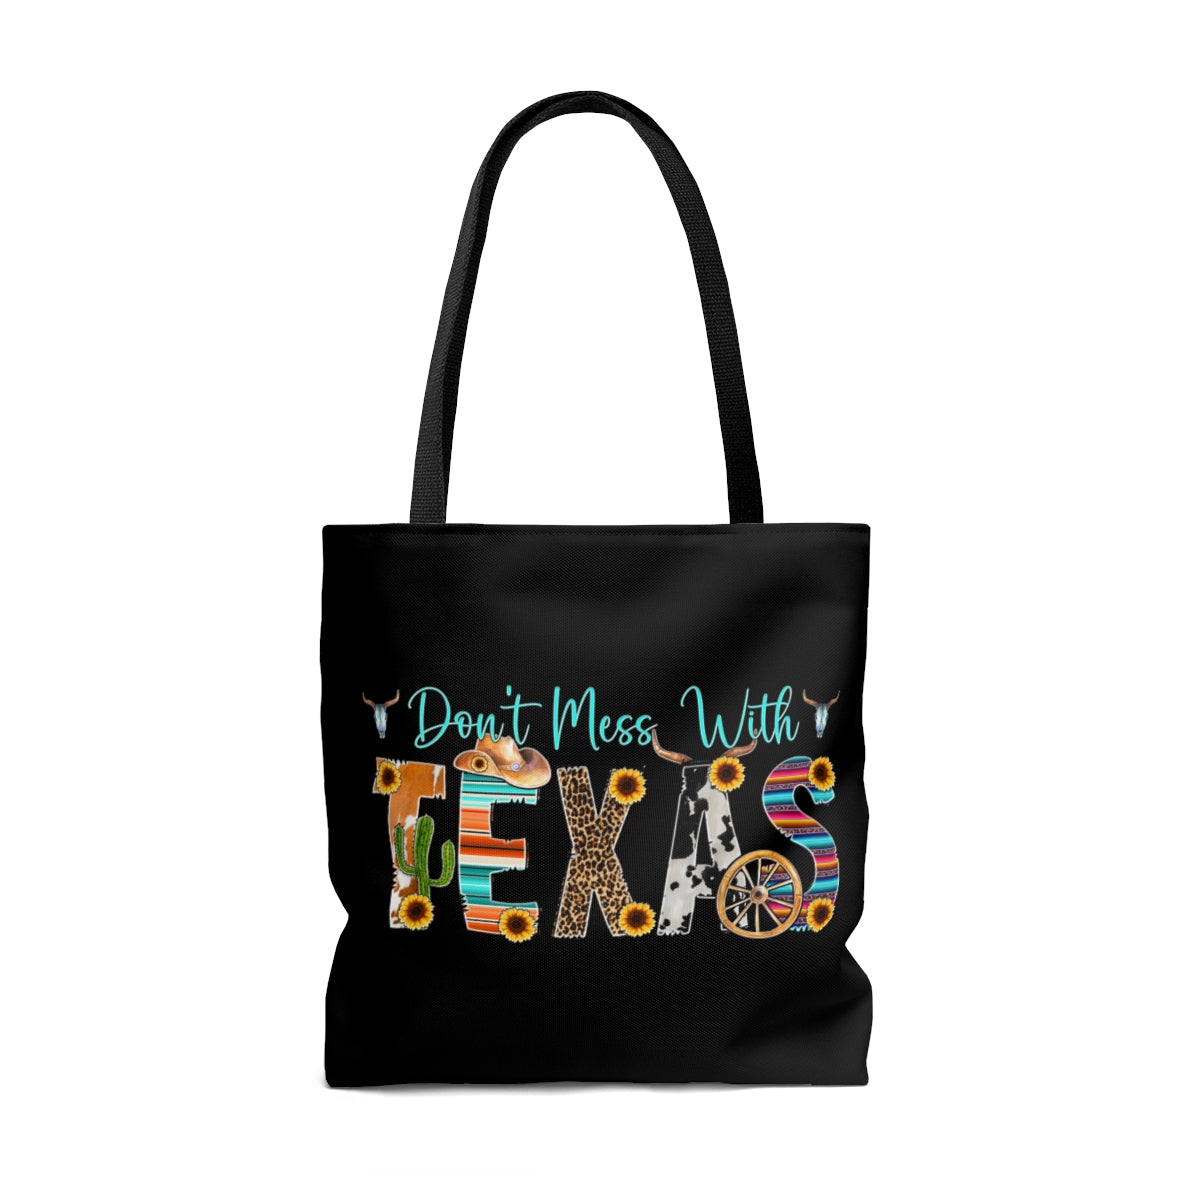 Texas Tote Bag, Don't Mess With Texas, Tote Bag For Women, Women's Tote Bag, Western Tote Bag, Western Tote, Texas Bag, Western Tote